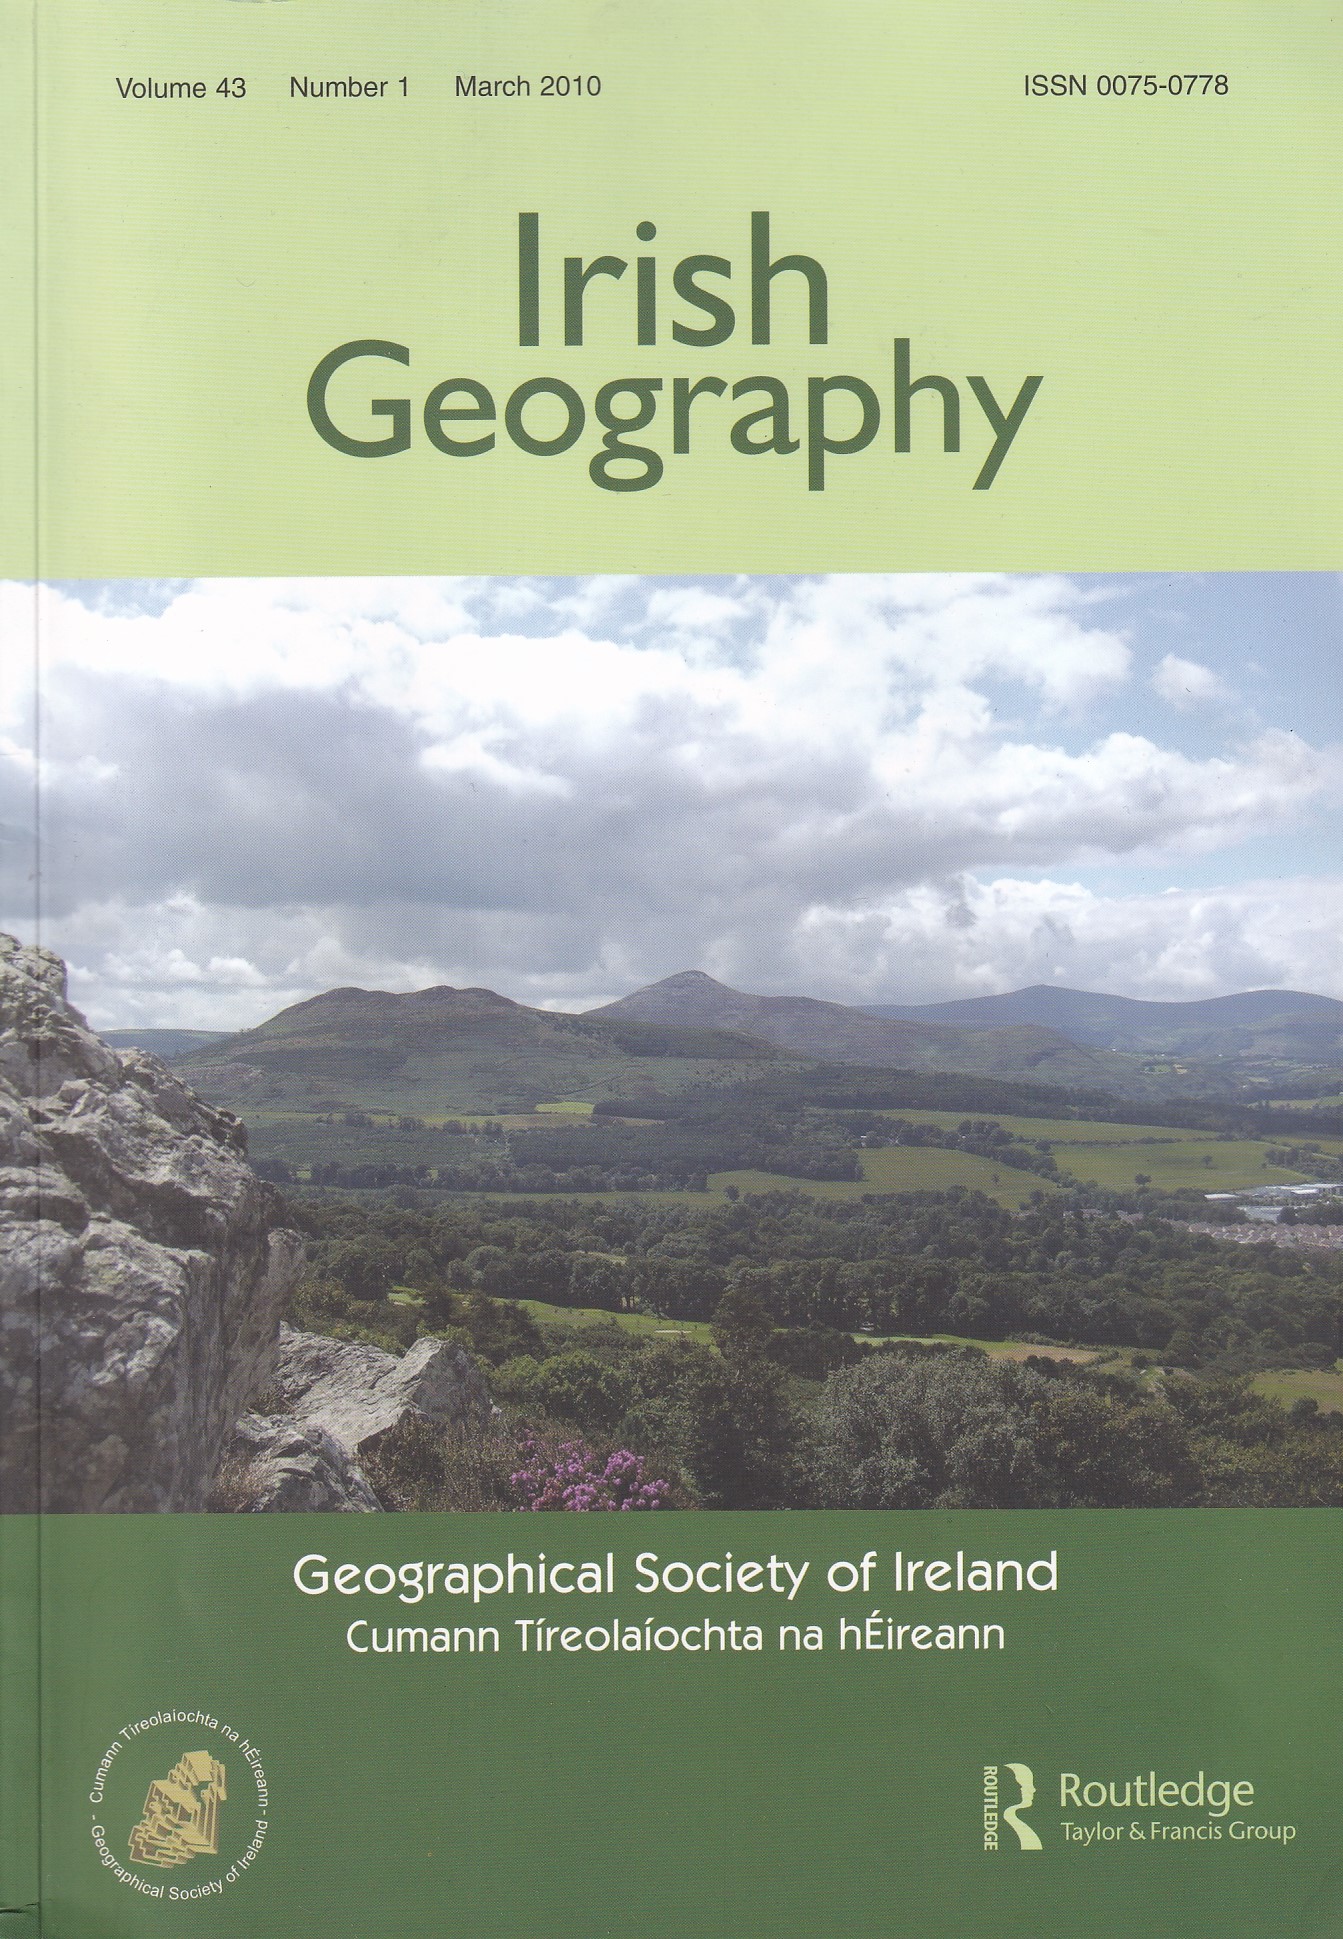 Irish Geography | Geographical Society of Ireland | Charlie Byrne's